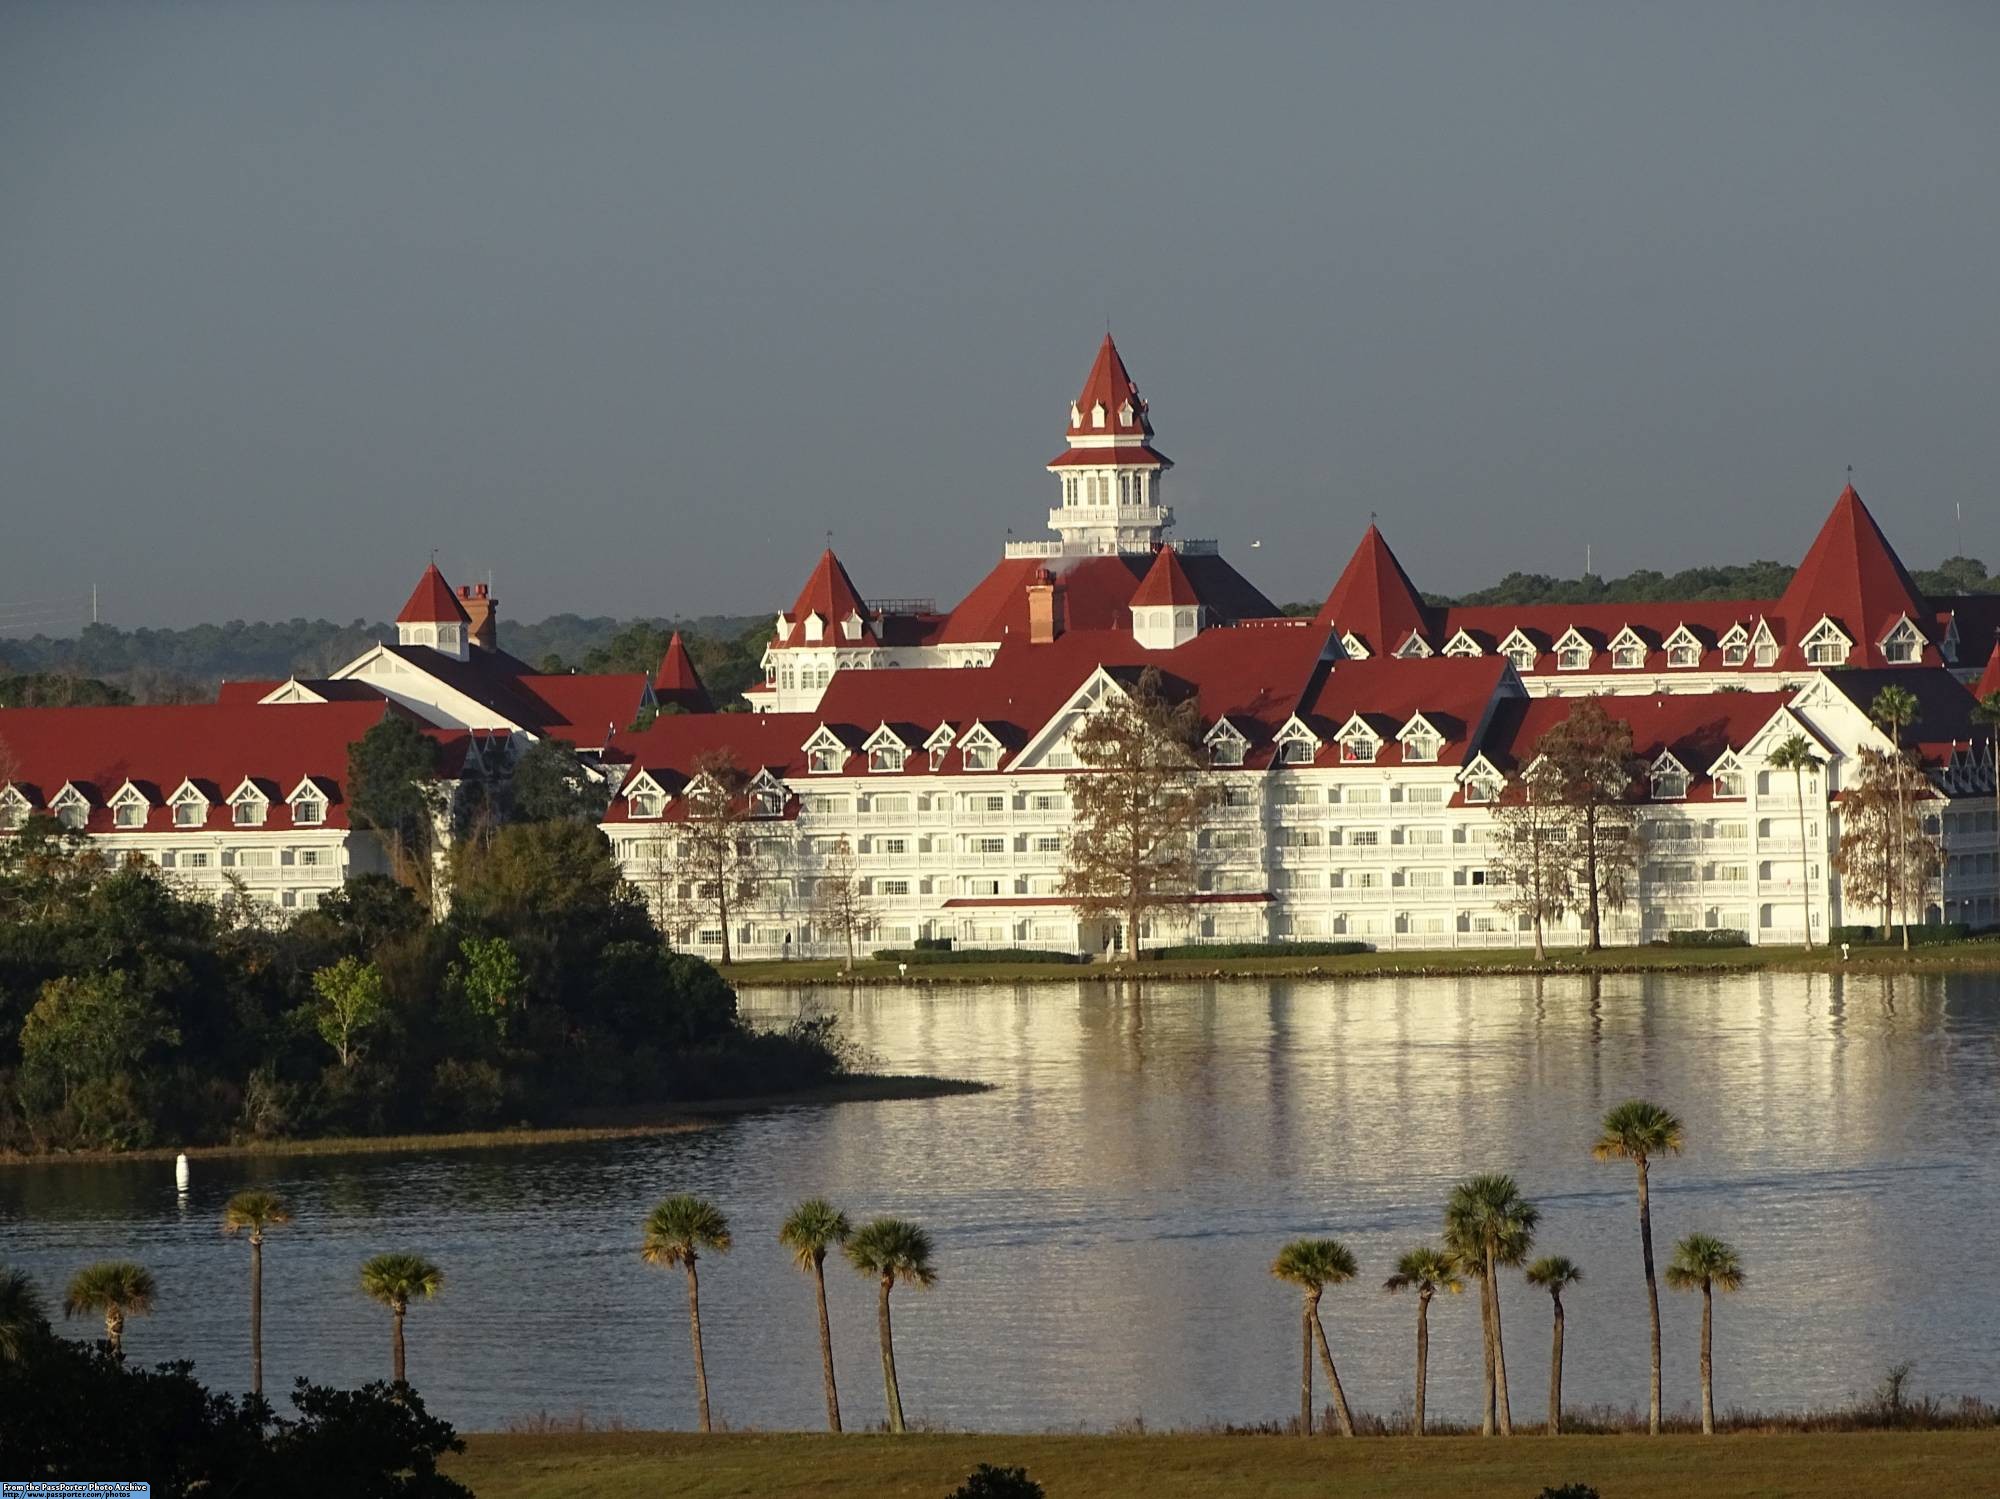 Grand Floridian - from Bay Lake Tower